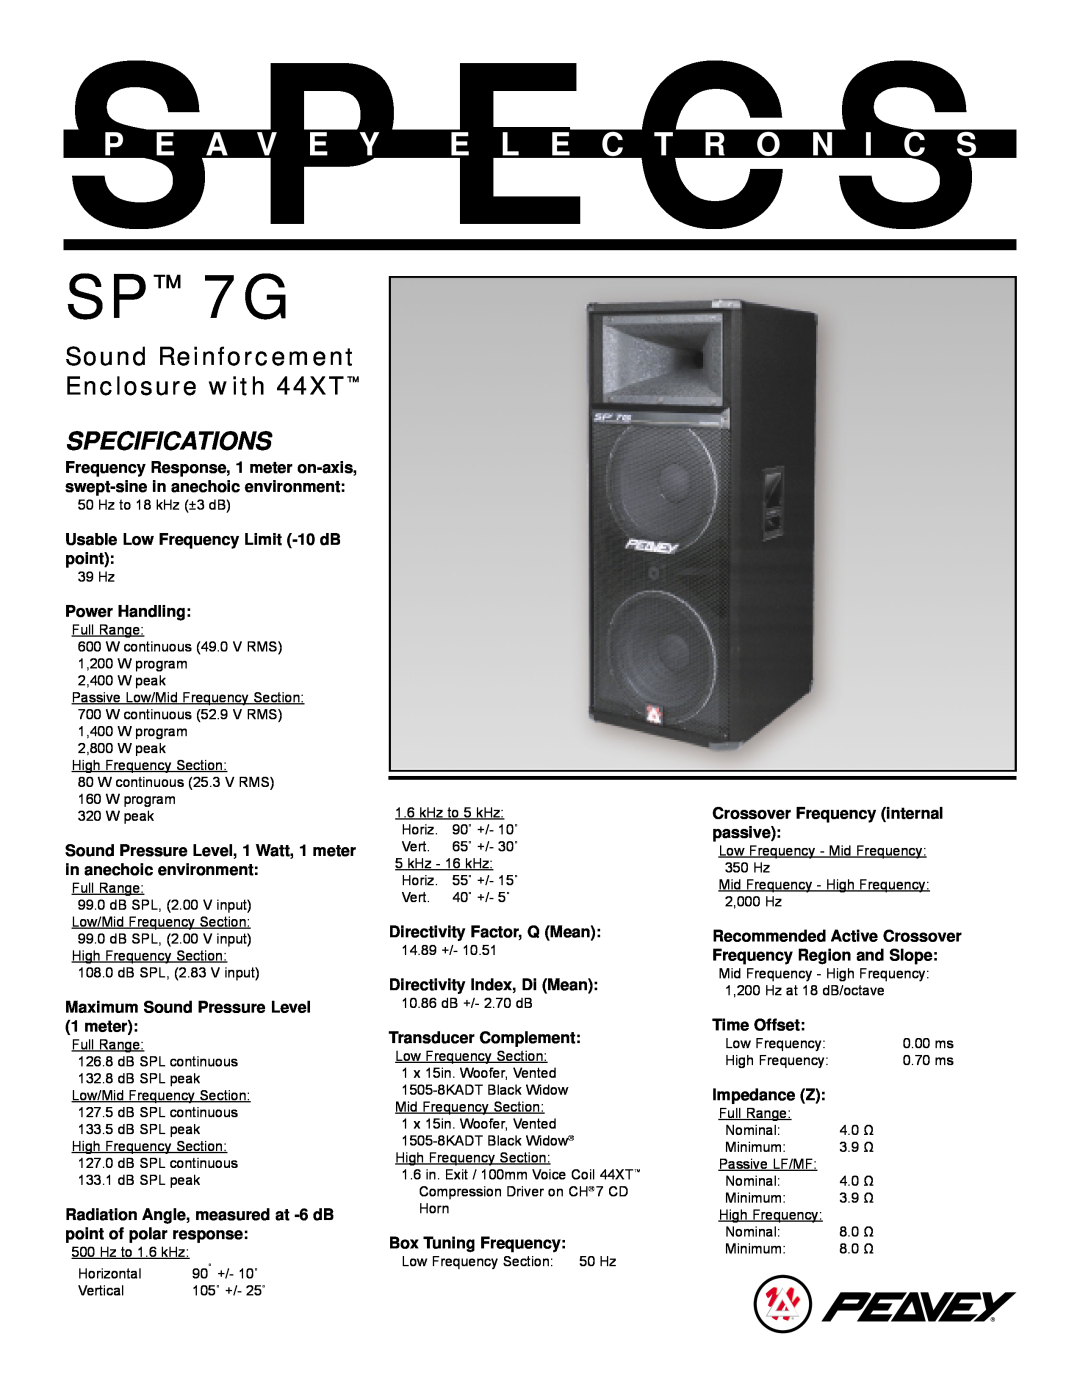 Peavey specifications SP 7G, Specifications, Sound Reinforcement Enclosure with 44XT 